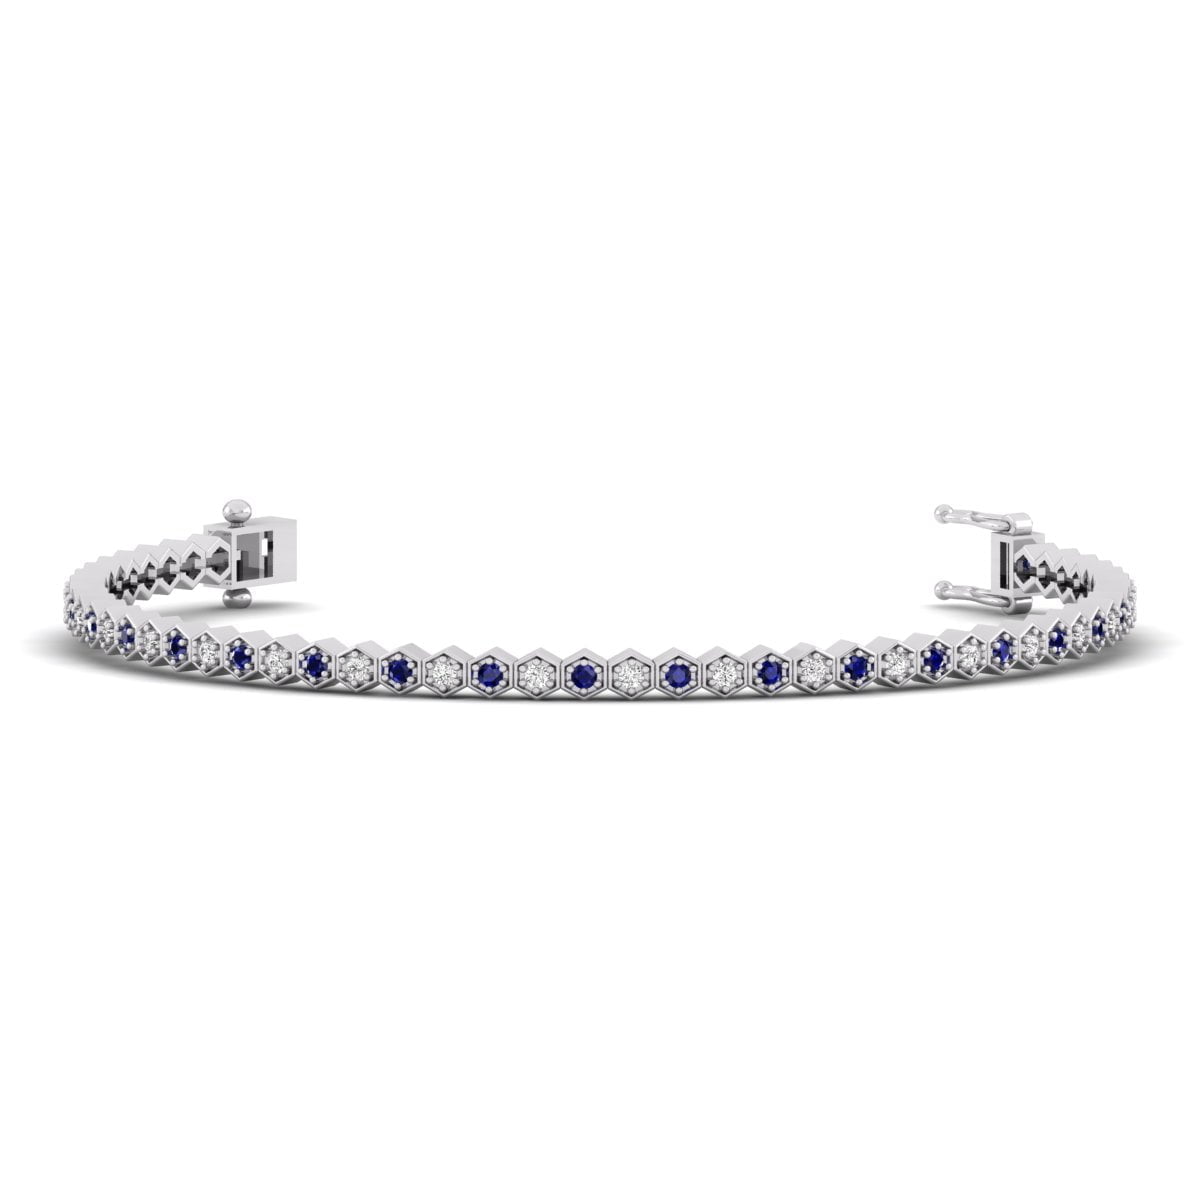 Blue Sapphire With White Round Cut CZ Stone Hexagon Shape Tennis Bracelet For Gift